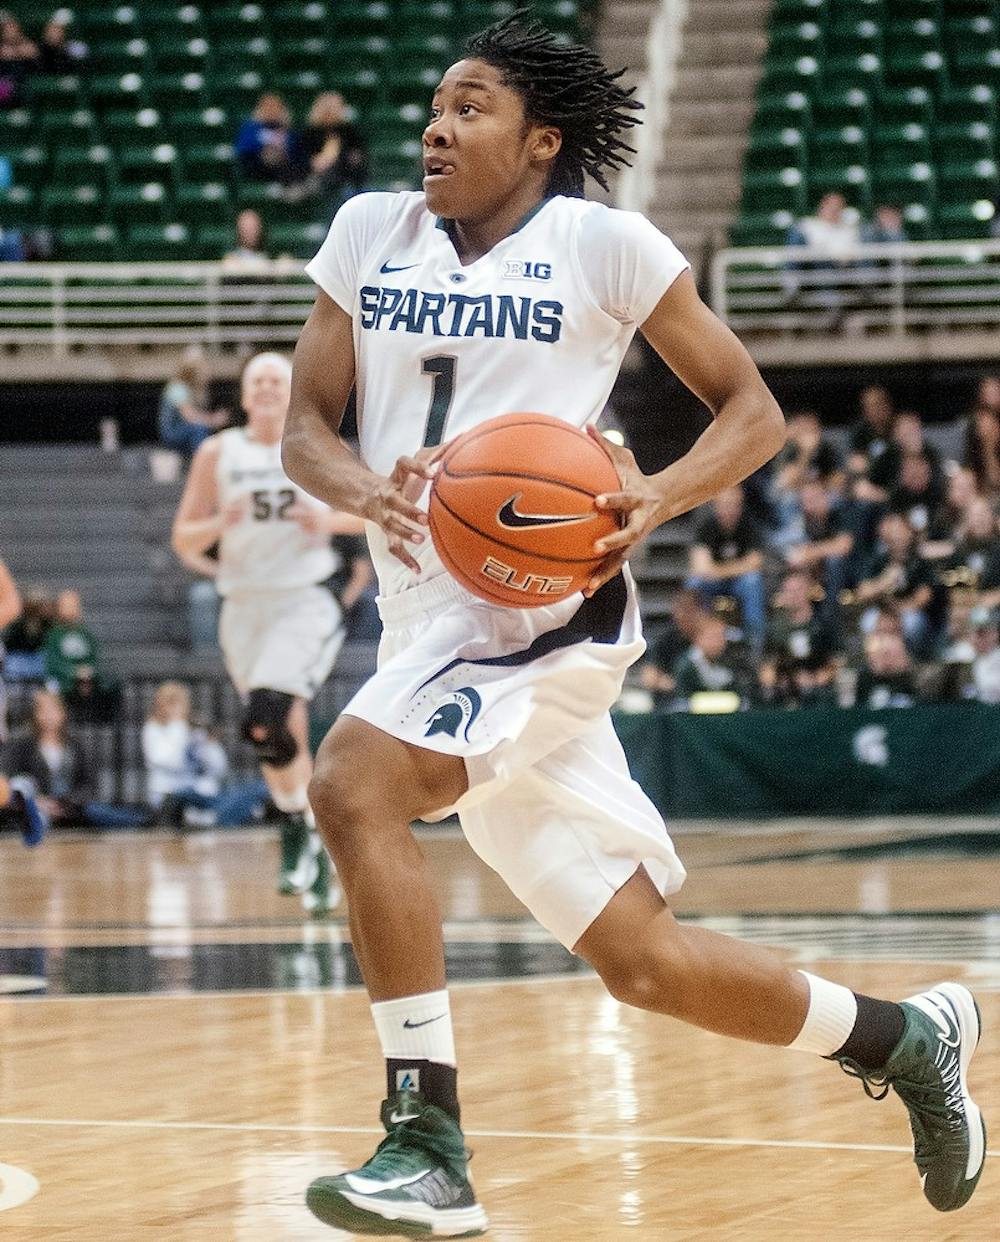 Senior guard Jasmine Thomas runs the ball on a fast break Nov. 4, 2012, at Breslin Center. Thomas finished with 15 points during a 83-36 victory over Grand Valley State in the second and final exhibition game of the season. Adam Toolin/The State News